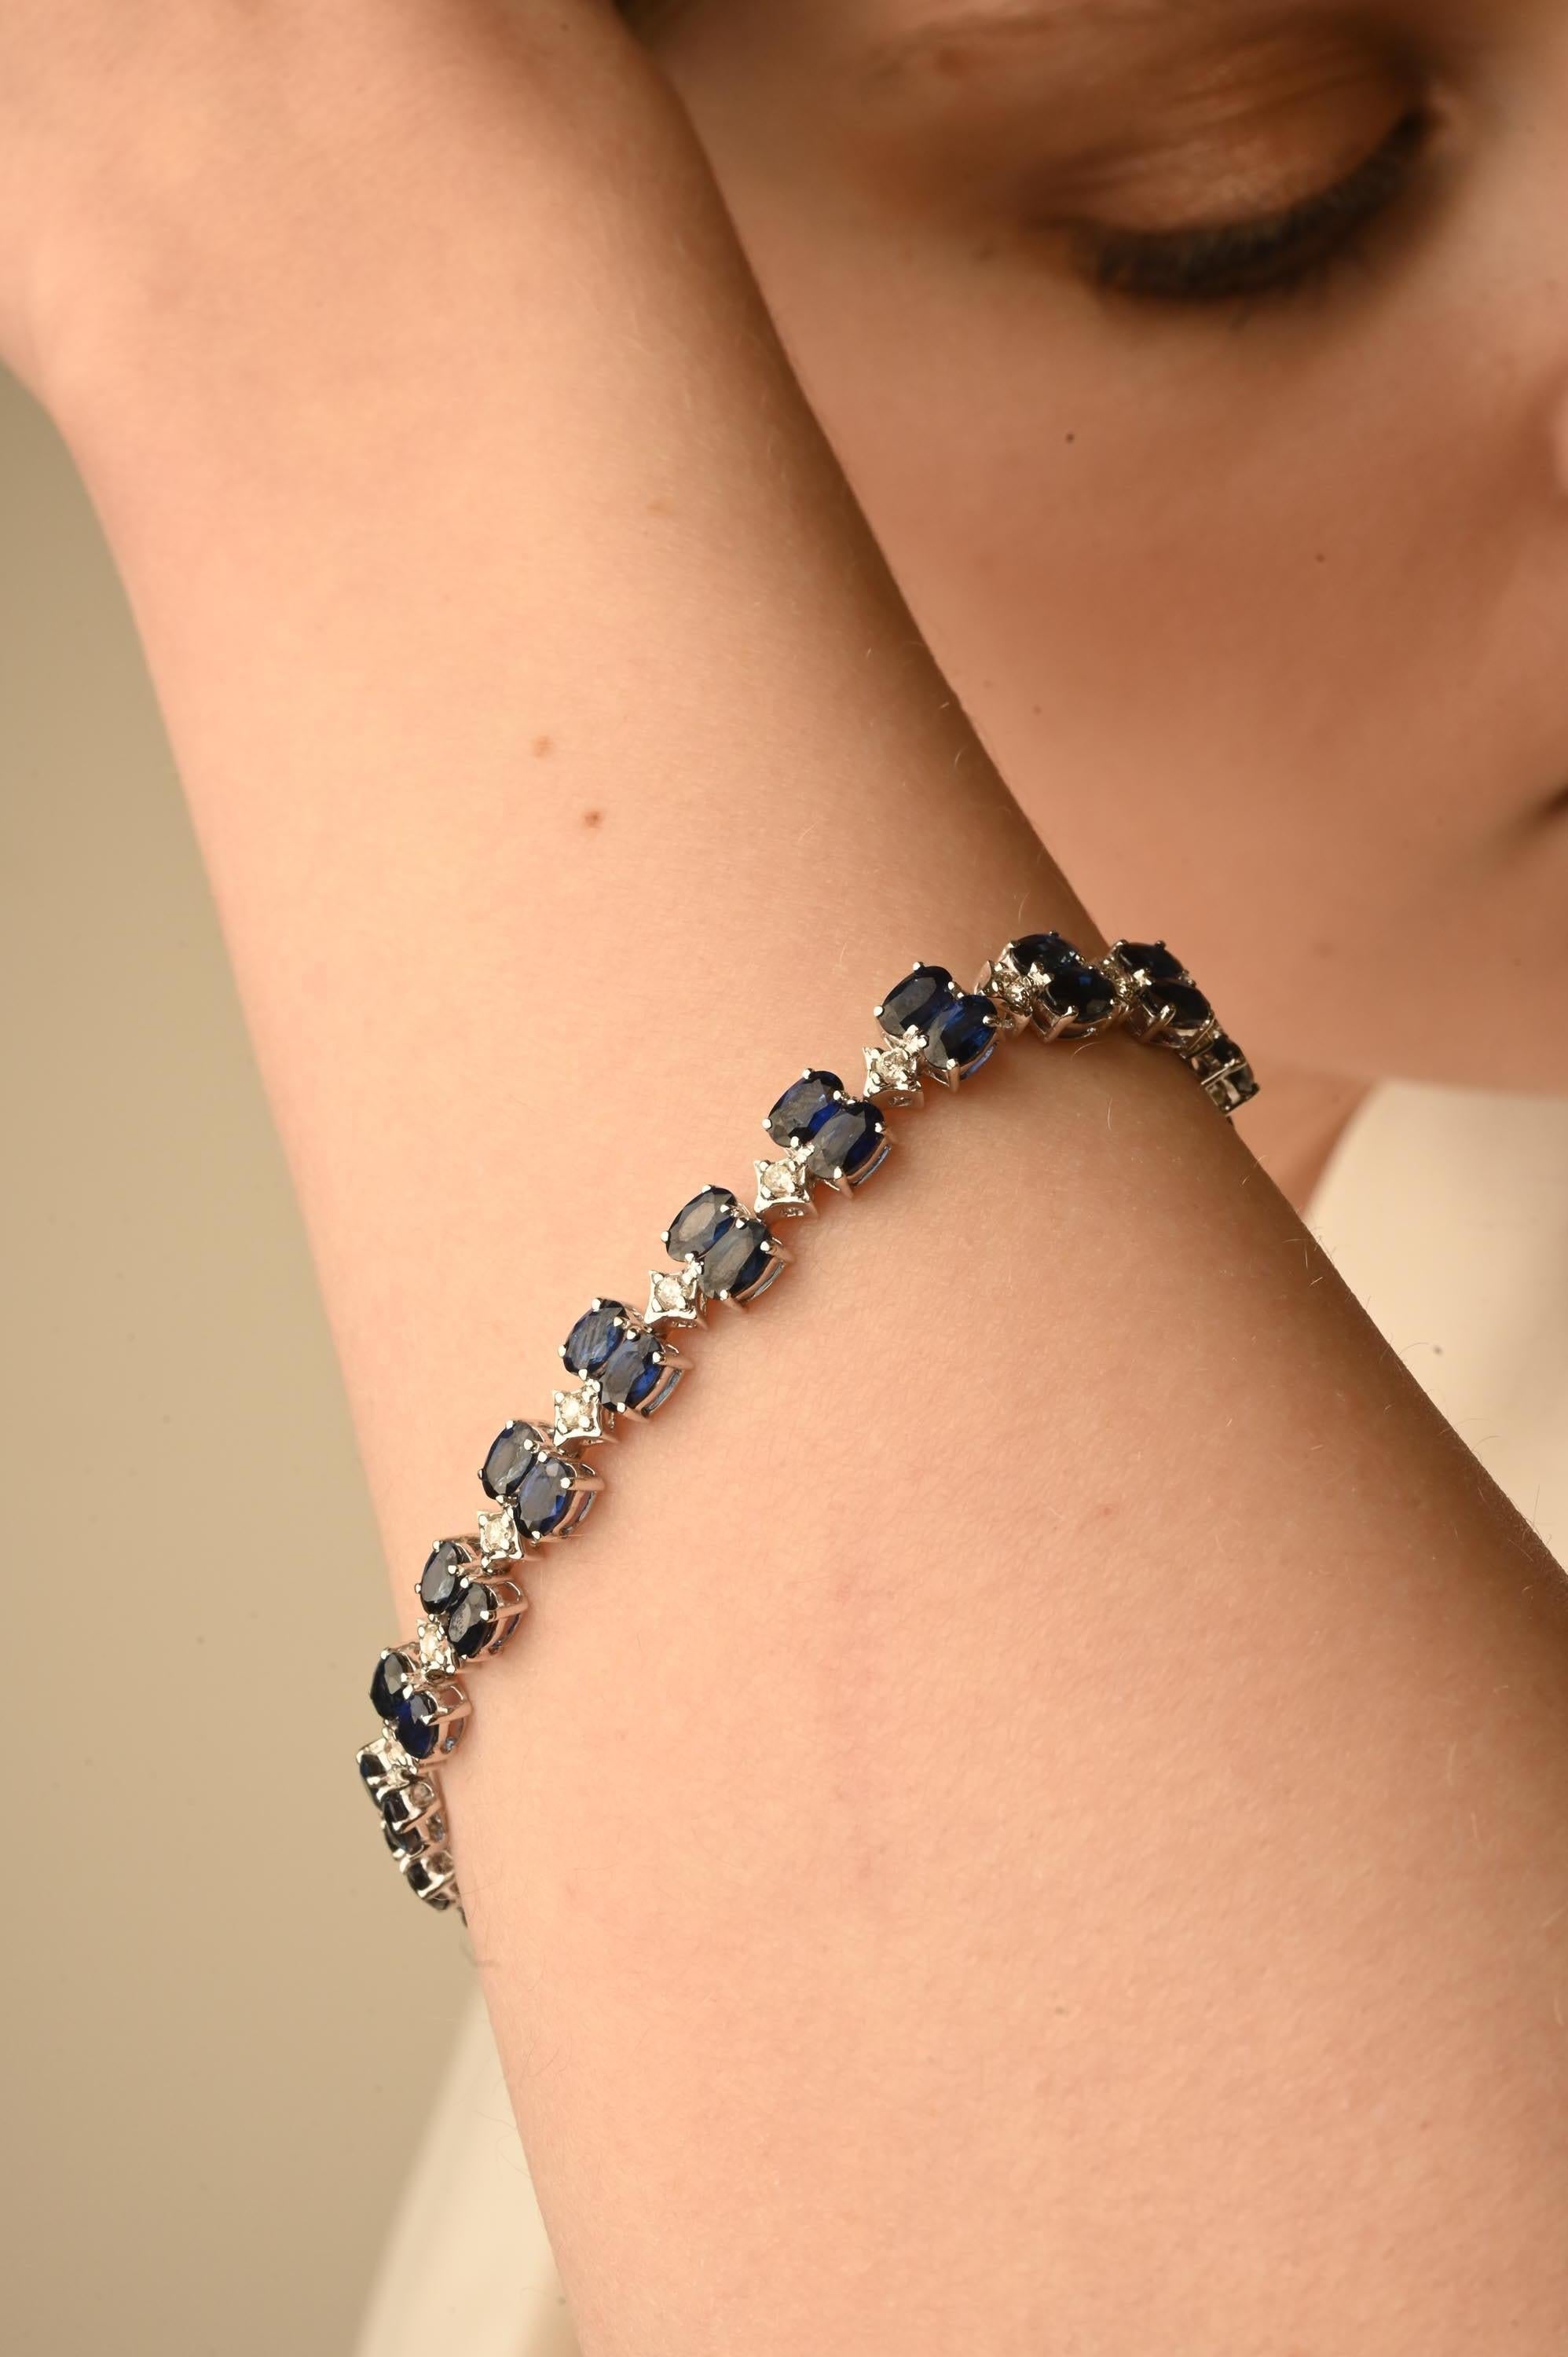 This Blue Sapphire Diamond Tennis Bracelet in 14K gold showcases 44 endlessly sparkling natural sapphires, weighing 14.37 carat and 22 pieces of diamonds weighing 0.56 carat. It measures 7.5 inches long in length. 
Sapphire stimulates concentration